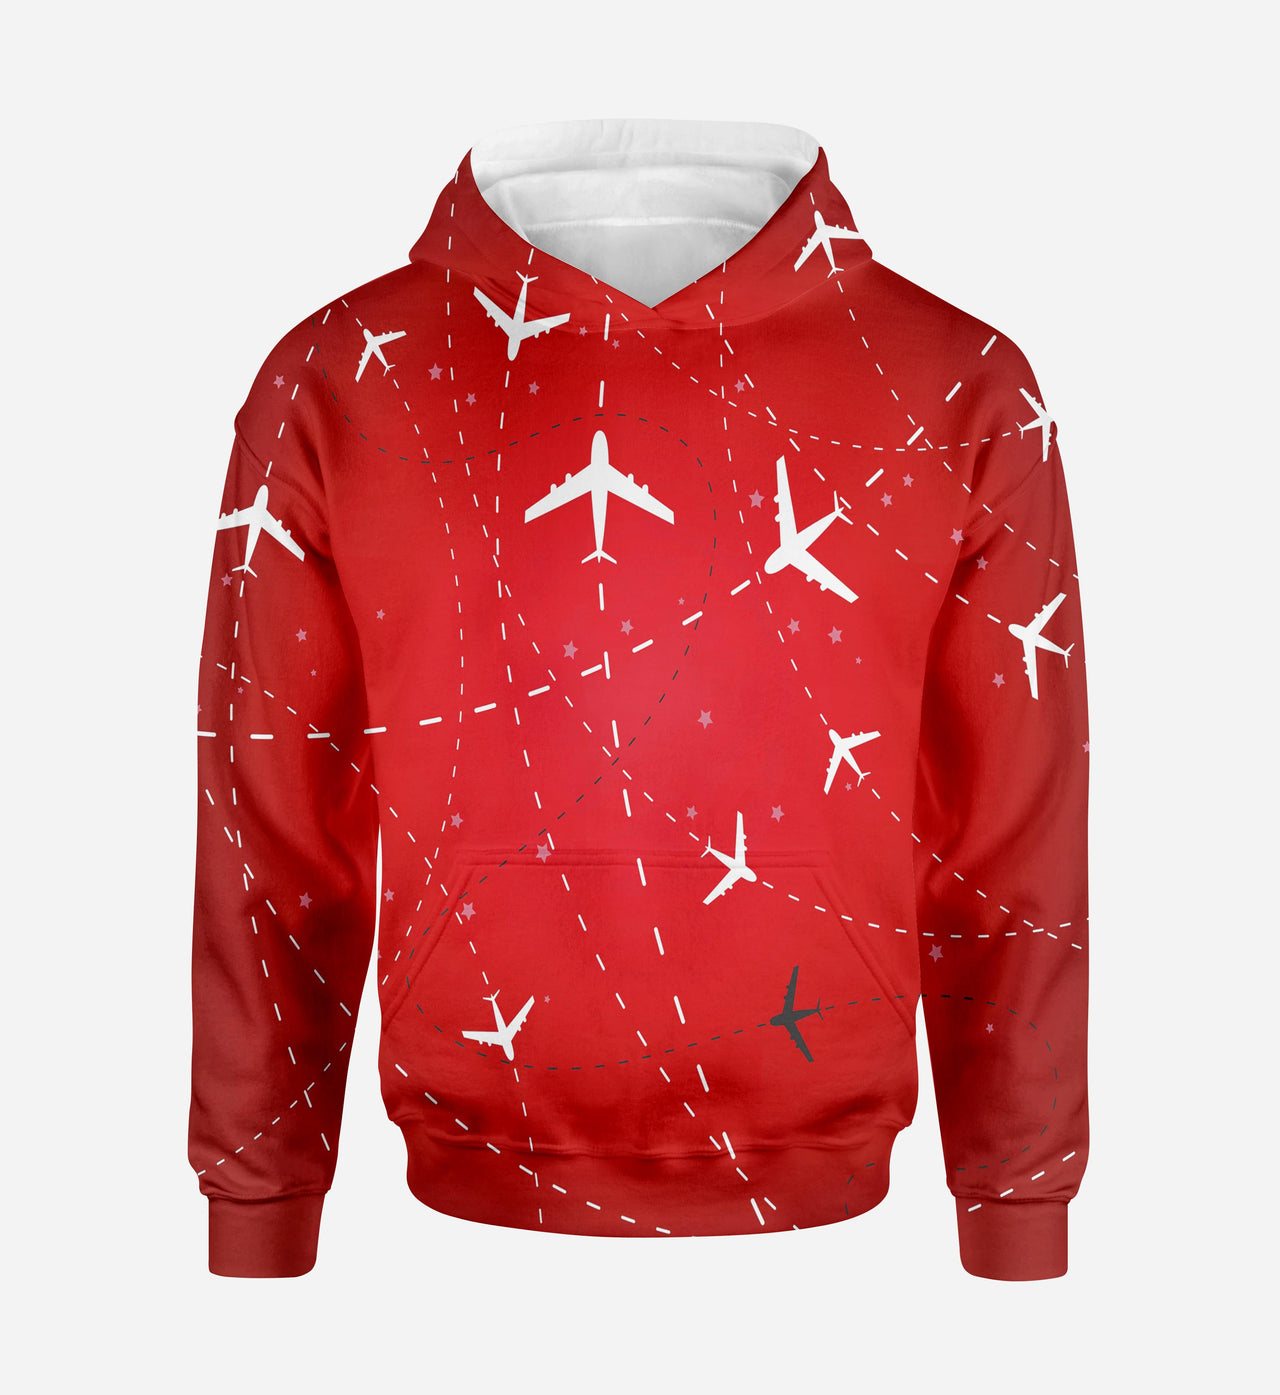 Travelling with Aircraft (Red) Printed 3D Hoodies